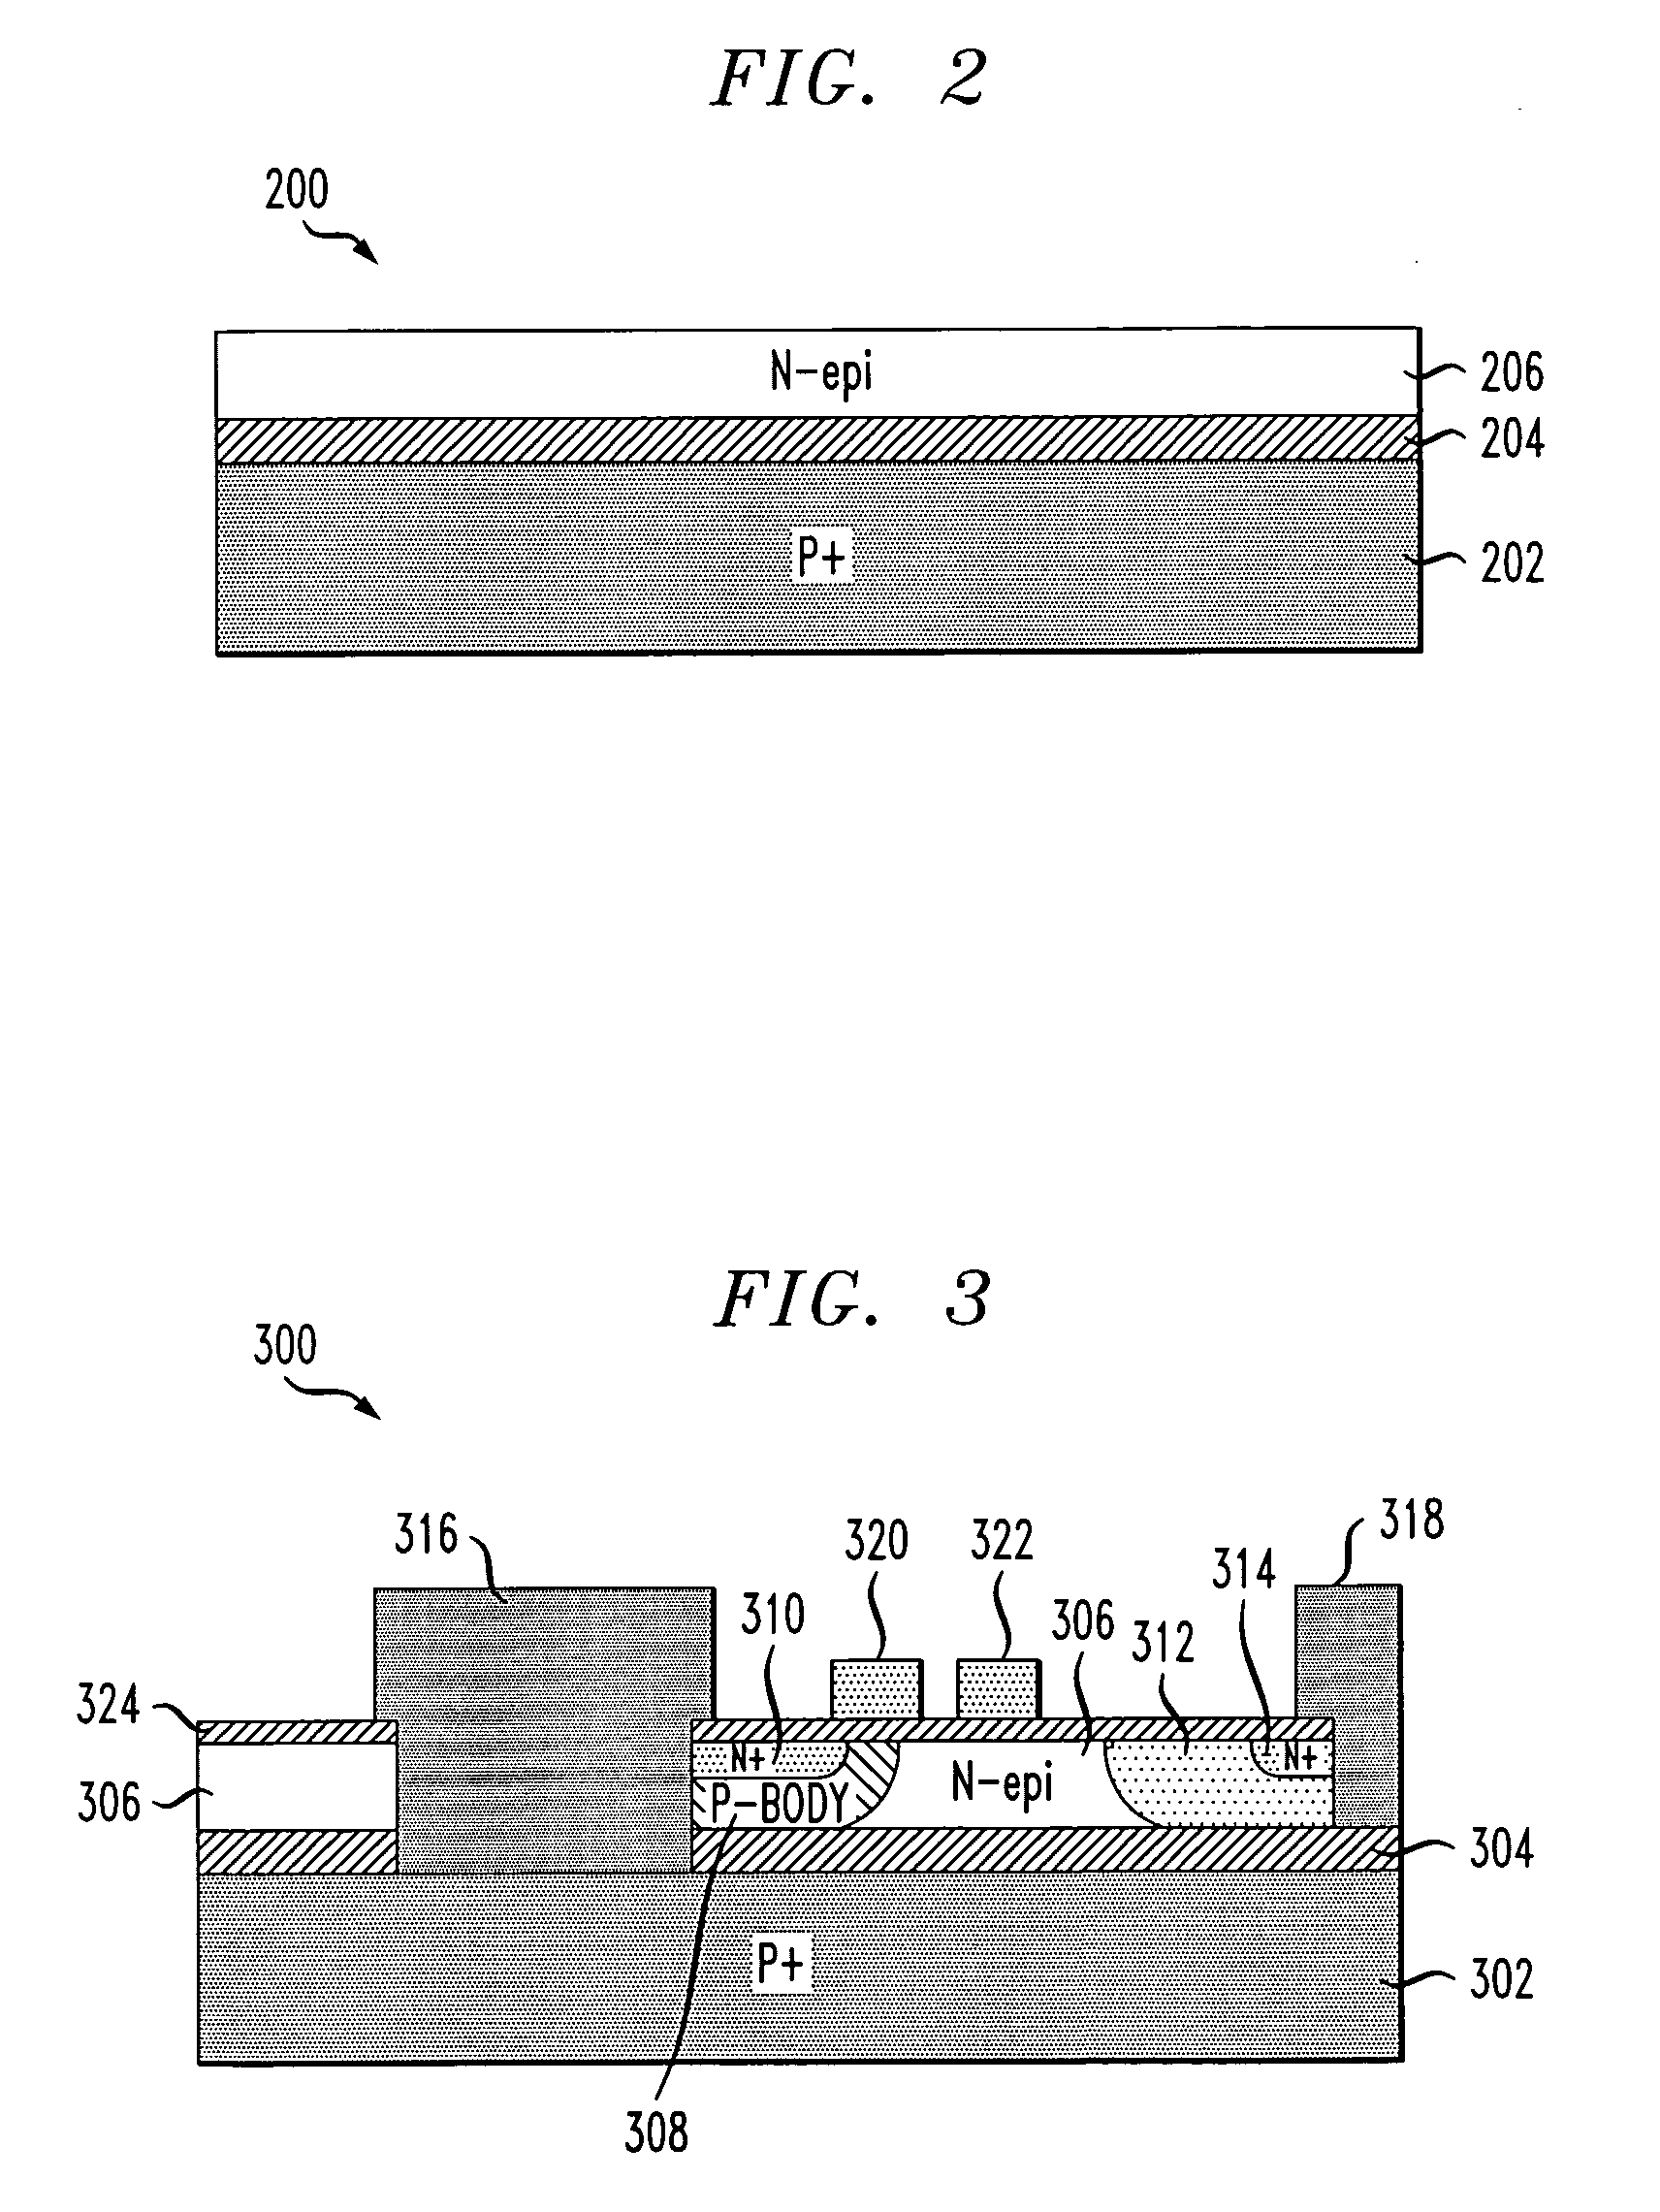 Metal-oxide-semiconductor device formed in silicon-on-insulator